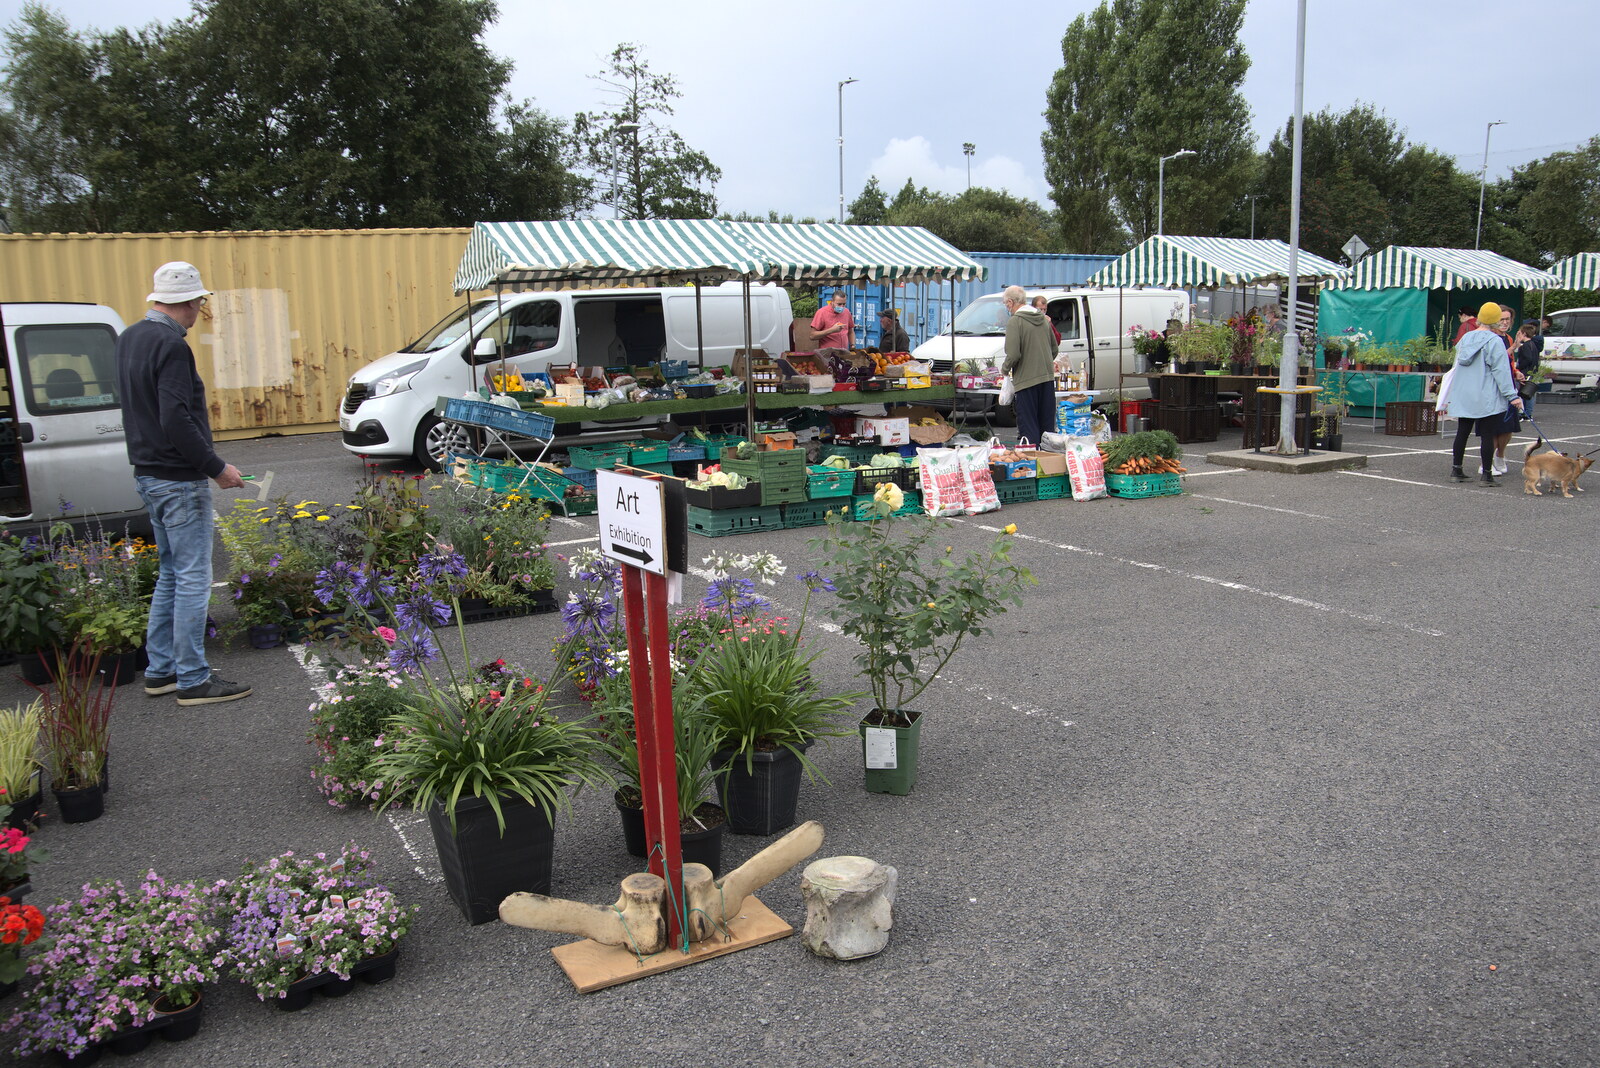 A flower and plant stall from Manorhamilton and the Street Art of Dún Laoghaire, Ireland - 15th August 2021